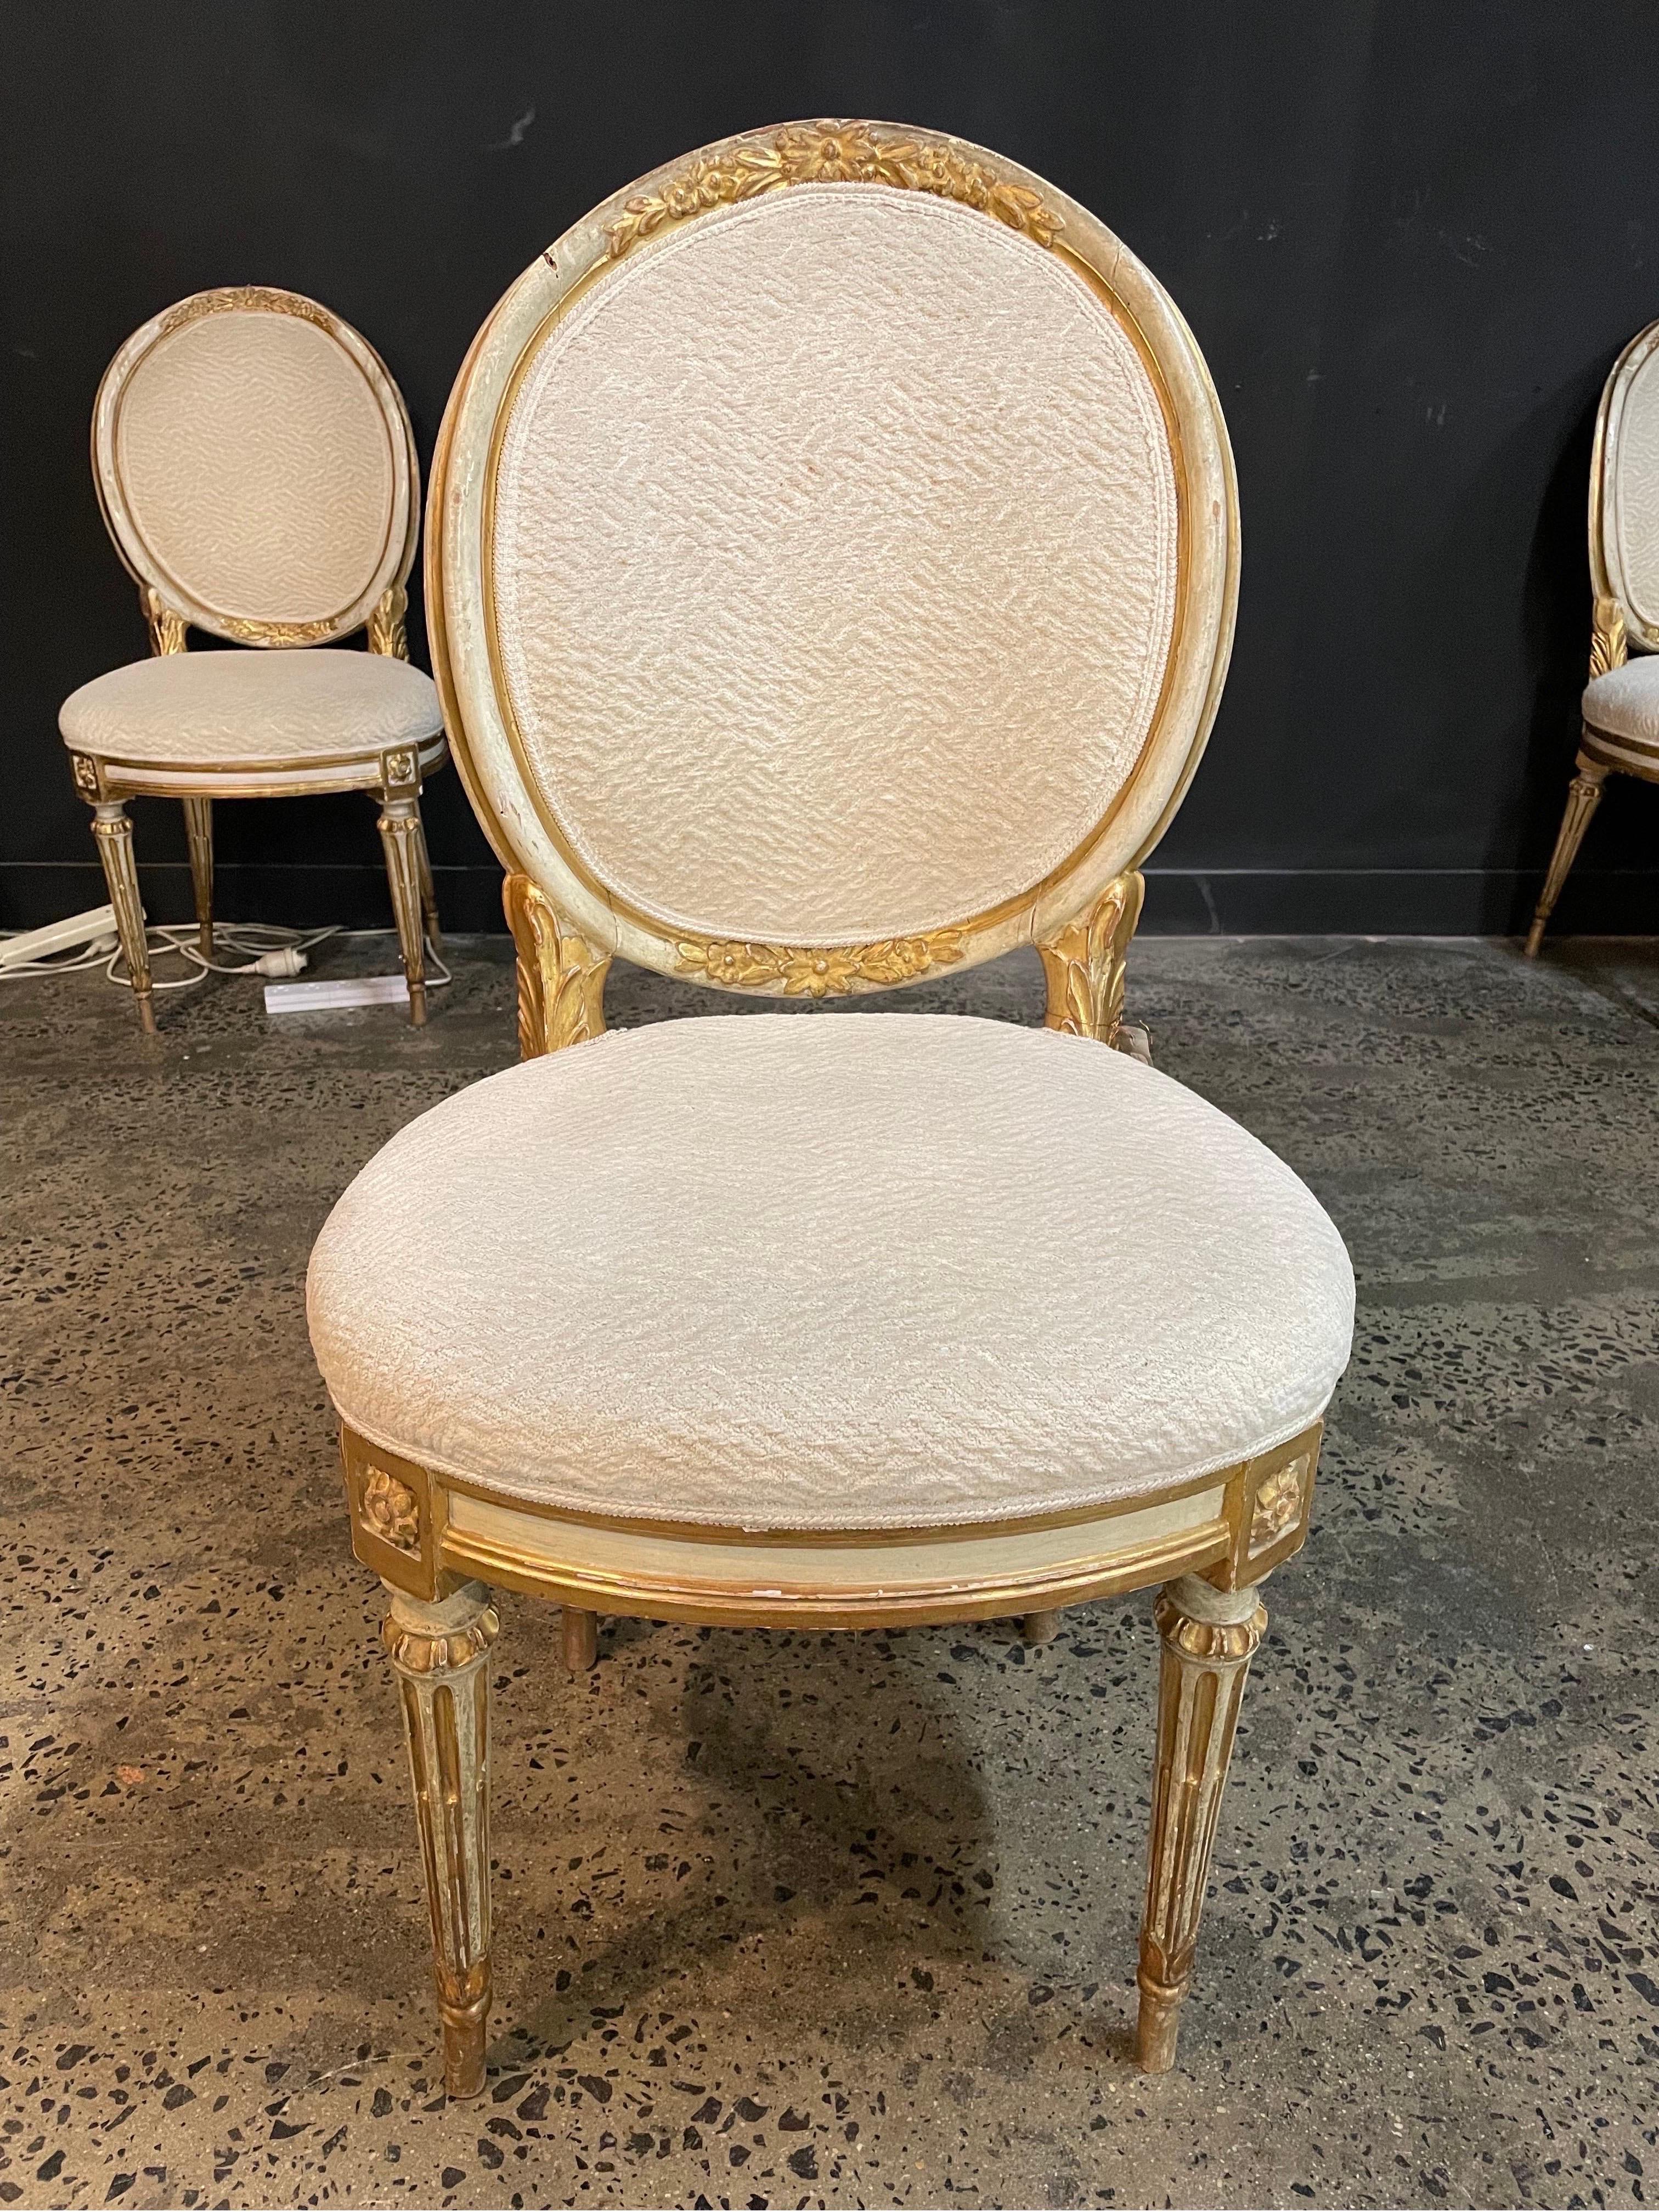 A set of twelve Italian painted and parcel gilt Louis XVI Style dining chairs, 19th century

Tablet back chairs with floral carved details raised on fluted legs with rosette embellishments, upholstered in textured cream chenille fabric.

Provenance: